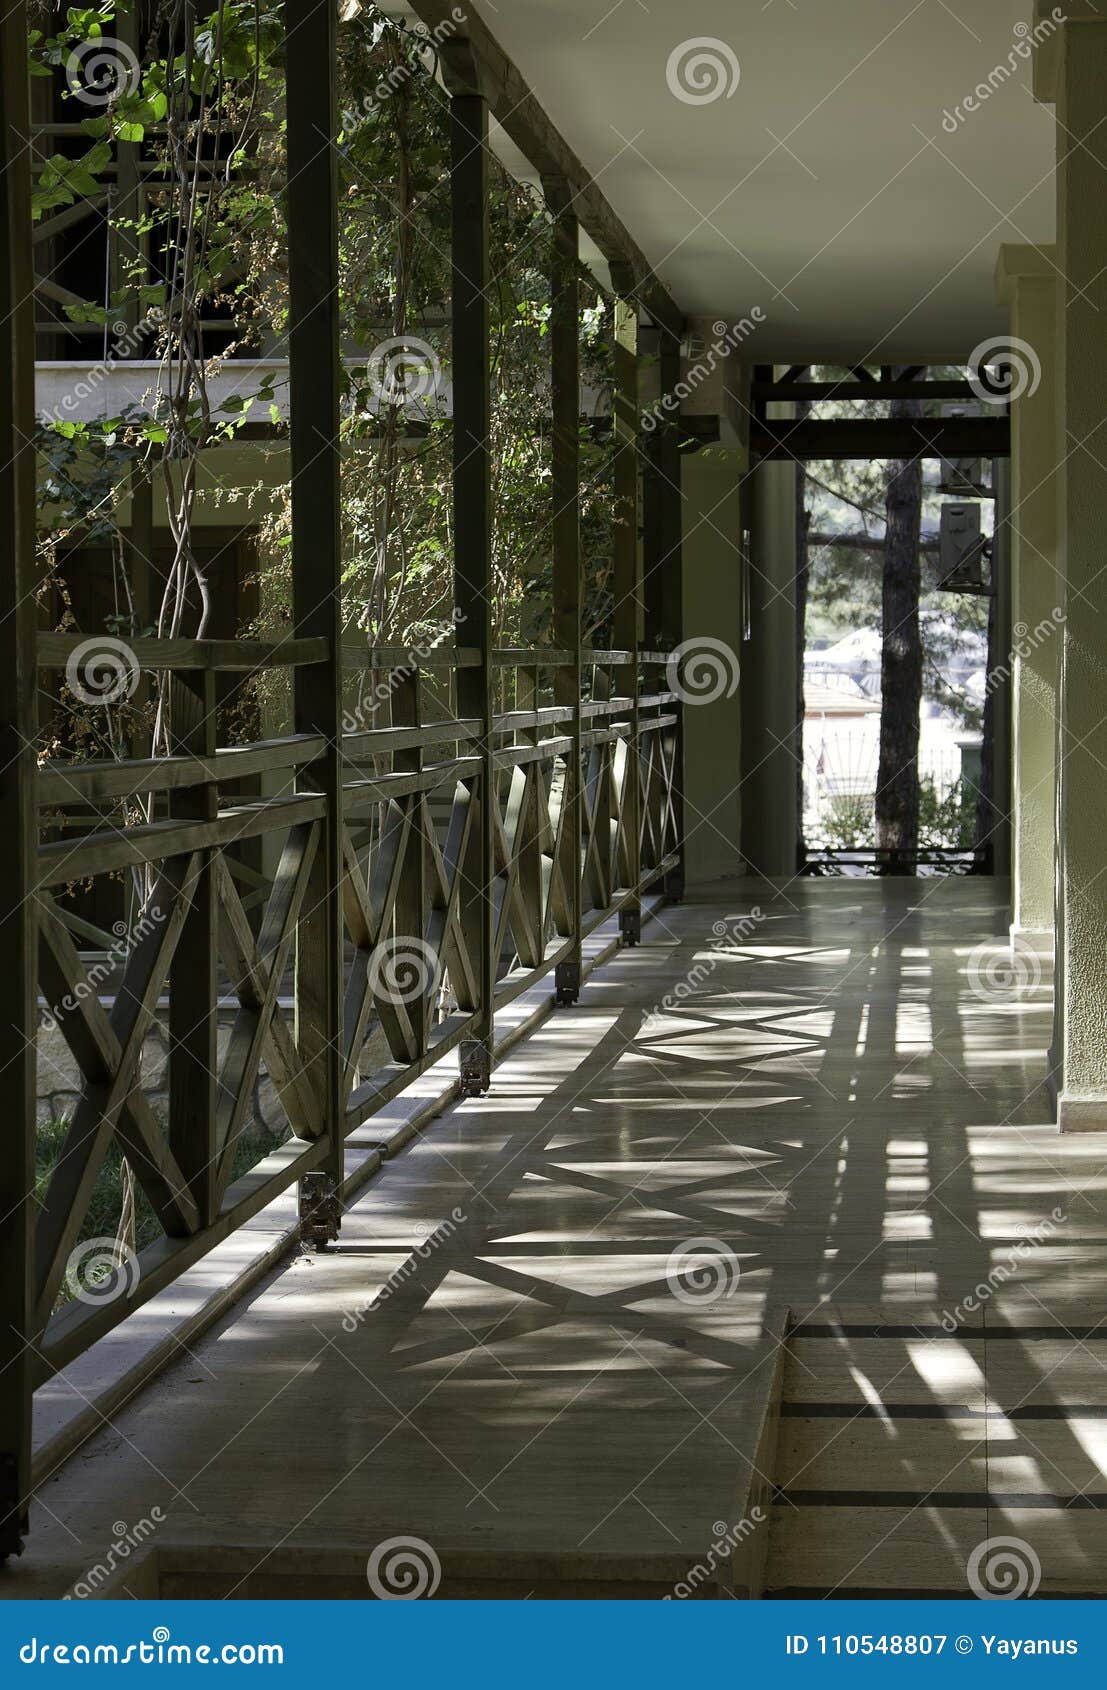 Covered Walkway the House in a Sunny Resort. Light and Shadow, a Beautiful Pattern of Shadows. Contrast. - Image of shadows, geometric: 110548807